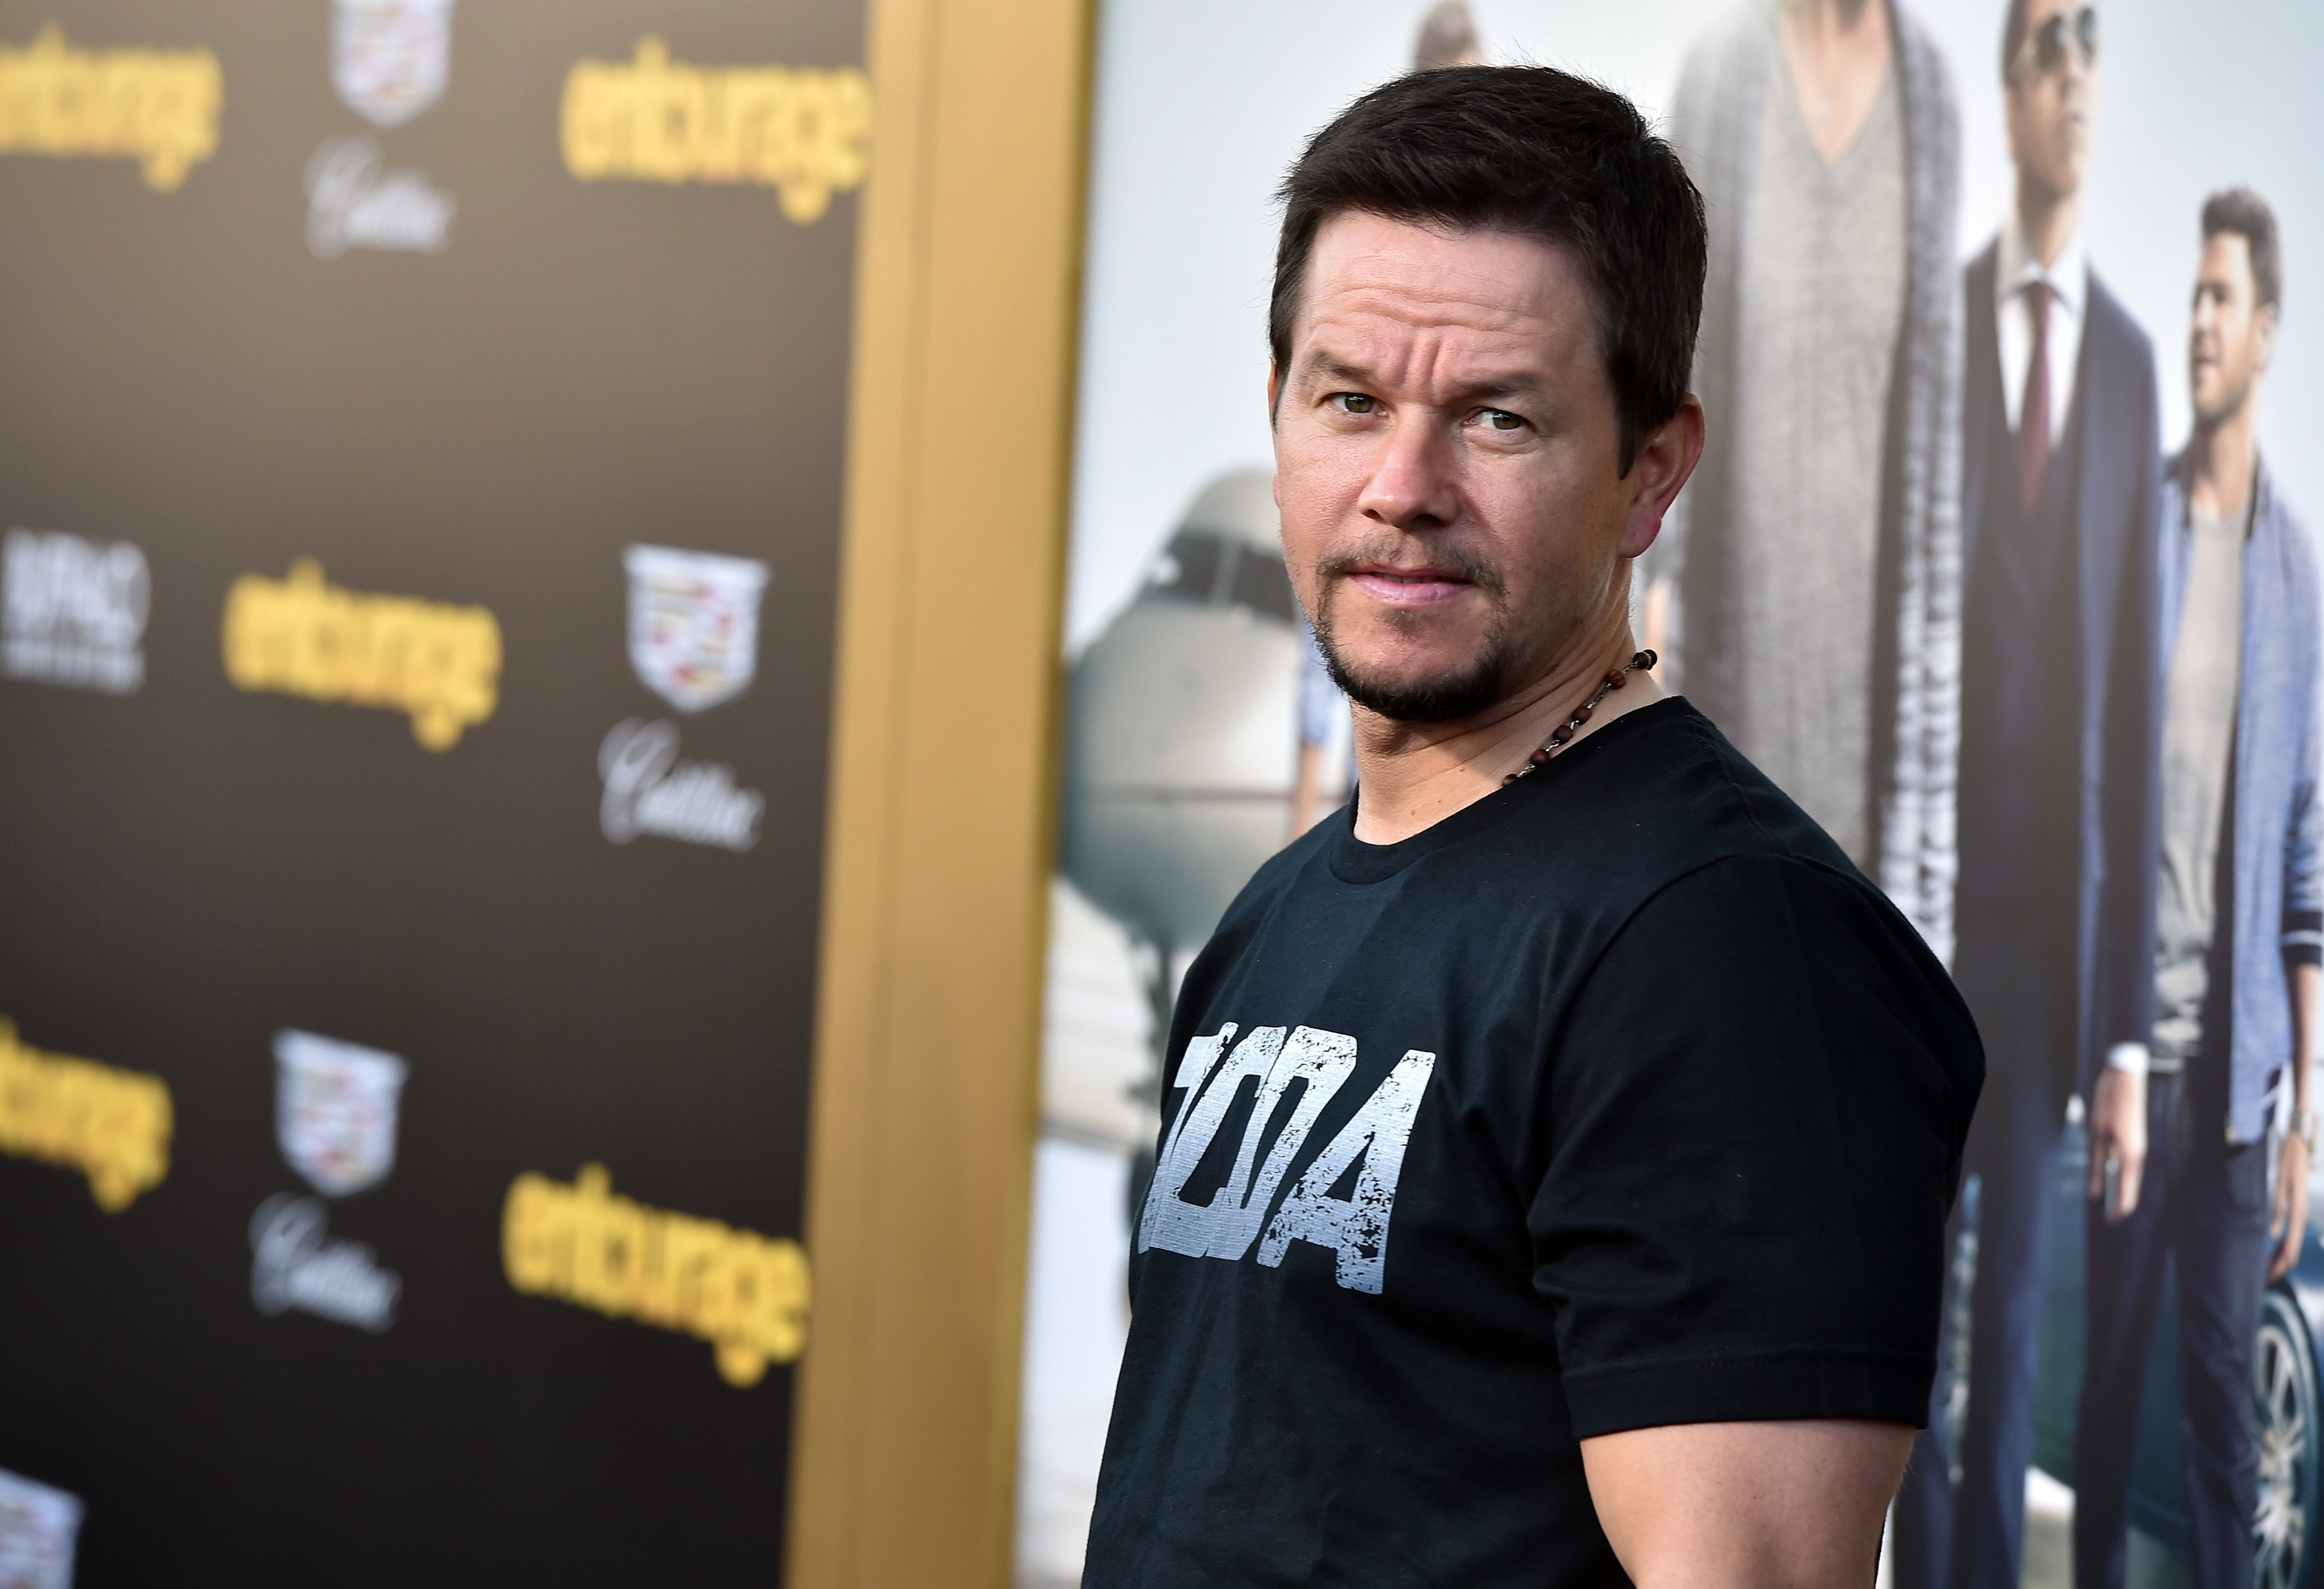 Mark Wahlberg attends the premiere of Warner Bros. Pictures' "Entourage" at Regency Village Theatre on June 1, 2015, in Westwood, California. | Source: Getty Images.